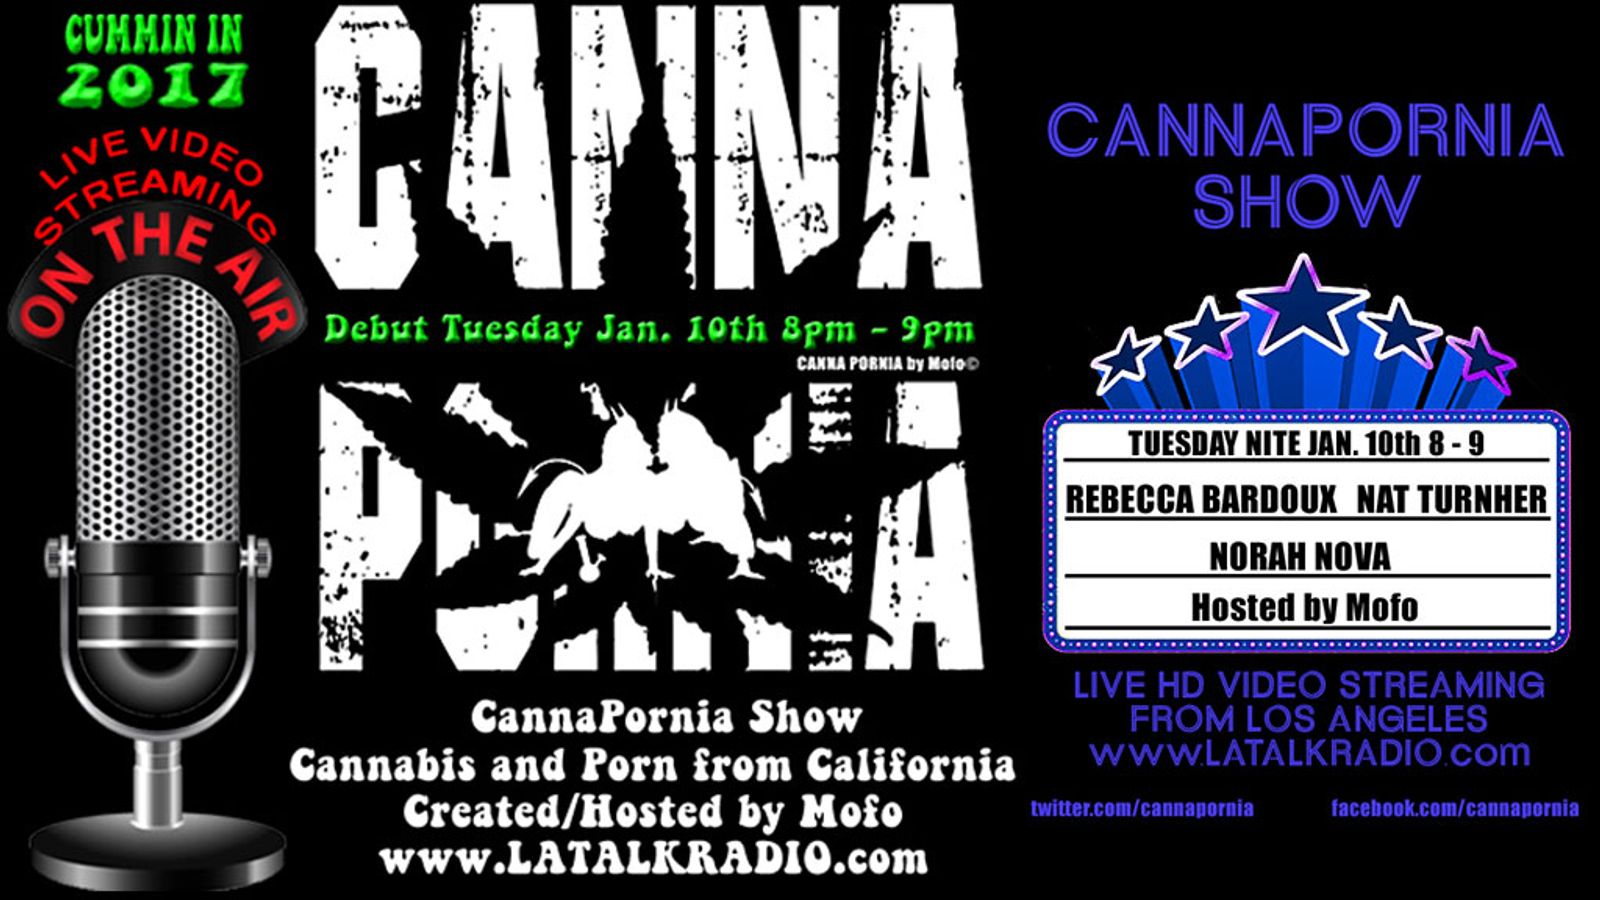 The CannaPornia Show to Debut, Discussing Cannabis and Porn in CA